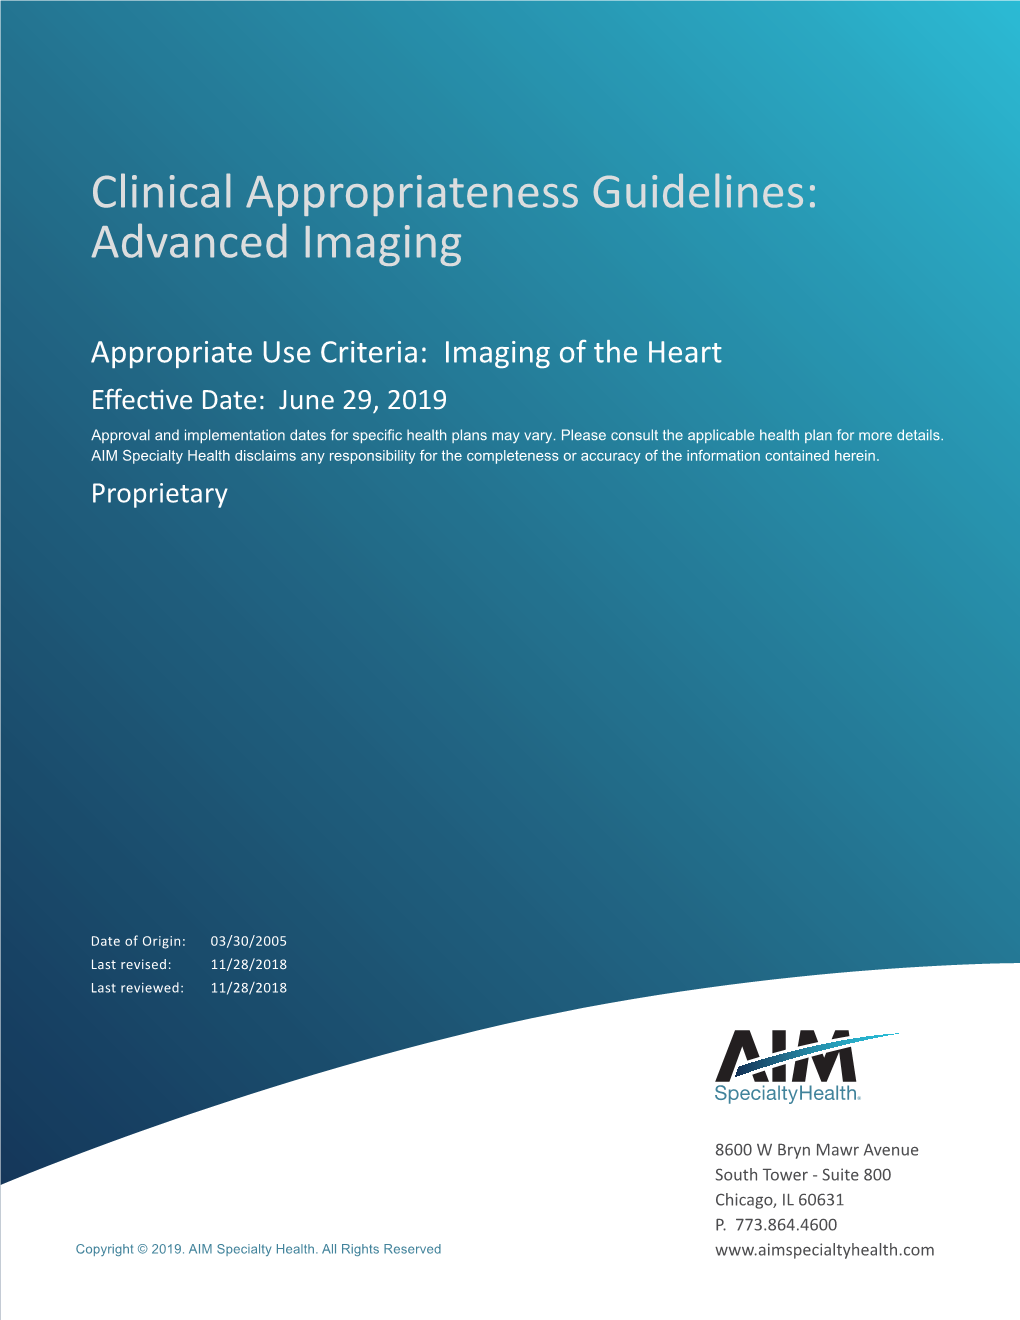 Clinical Appropriateness Guidelines: Advanced Imaging